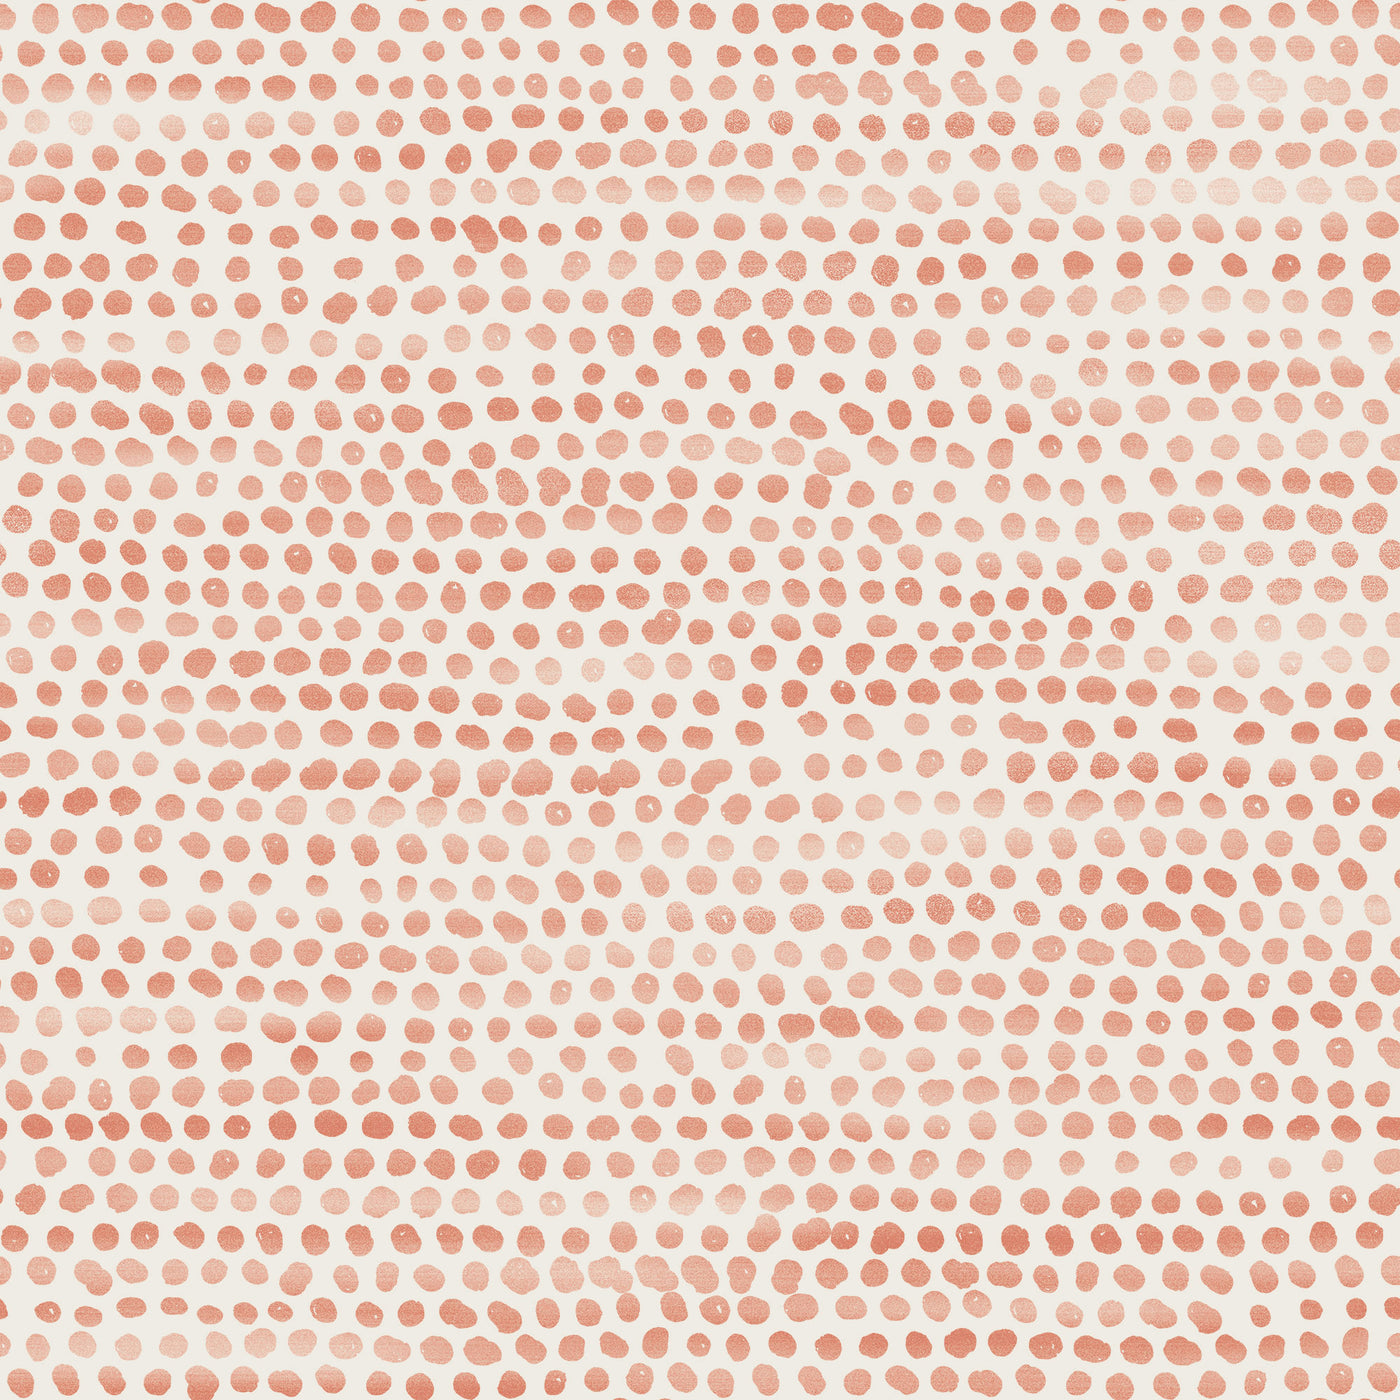 Moire Dots Removable Wallpaper - A swatch of Tempaper's Moire Dots Peel And Stick Wallpaper in coral dots | Tempaper#color_coral-dots